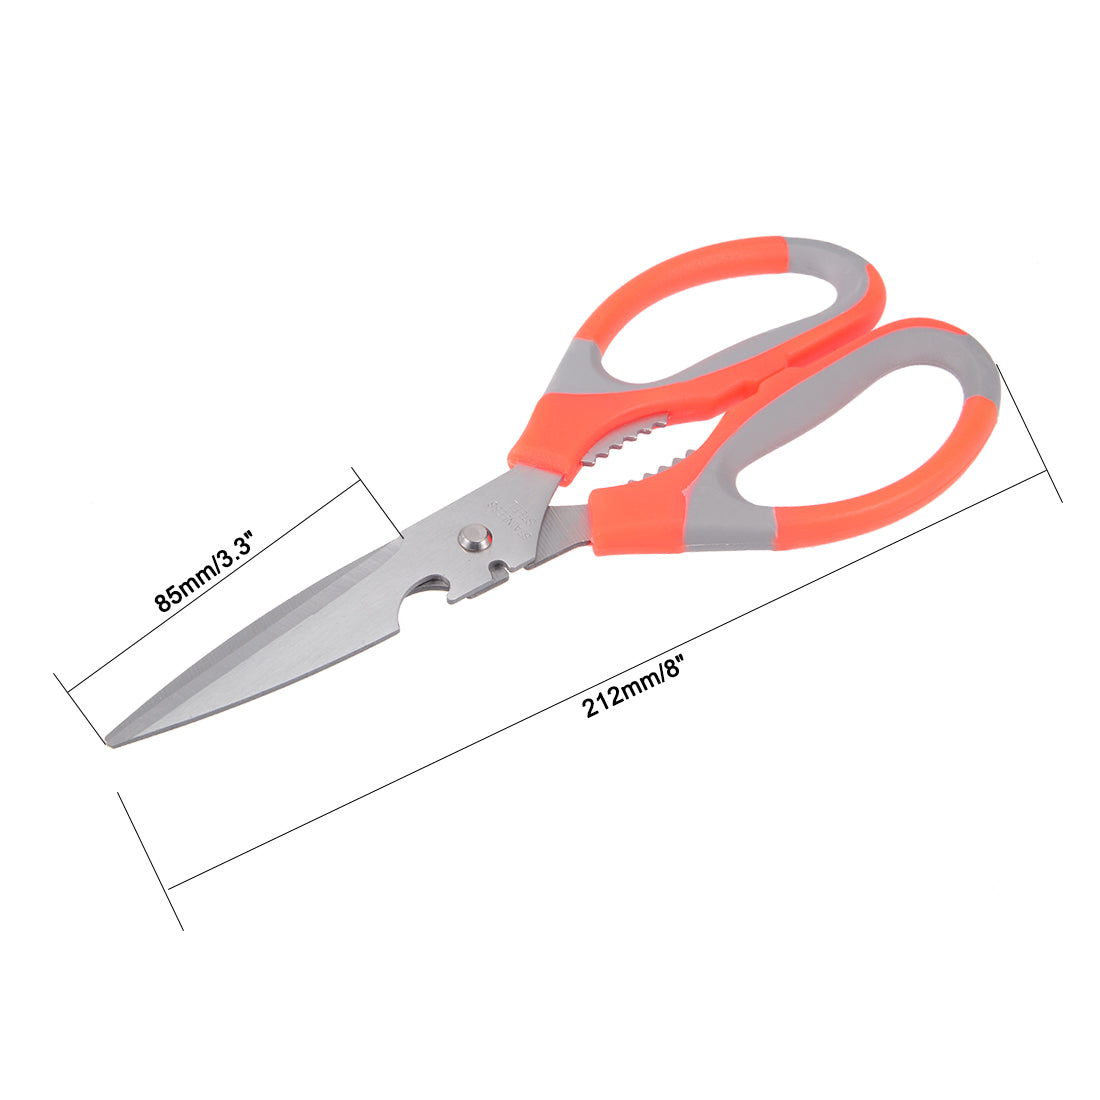 uxcell Uxcell 8 Inch Kitchen Scissor, Multi Purpose Shear for Chicken Poultry Fish Meat BBQ, Orange/Gray